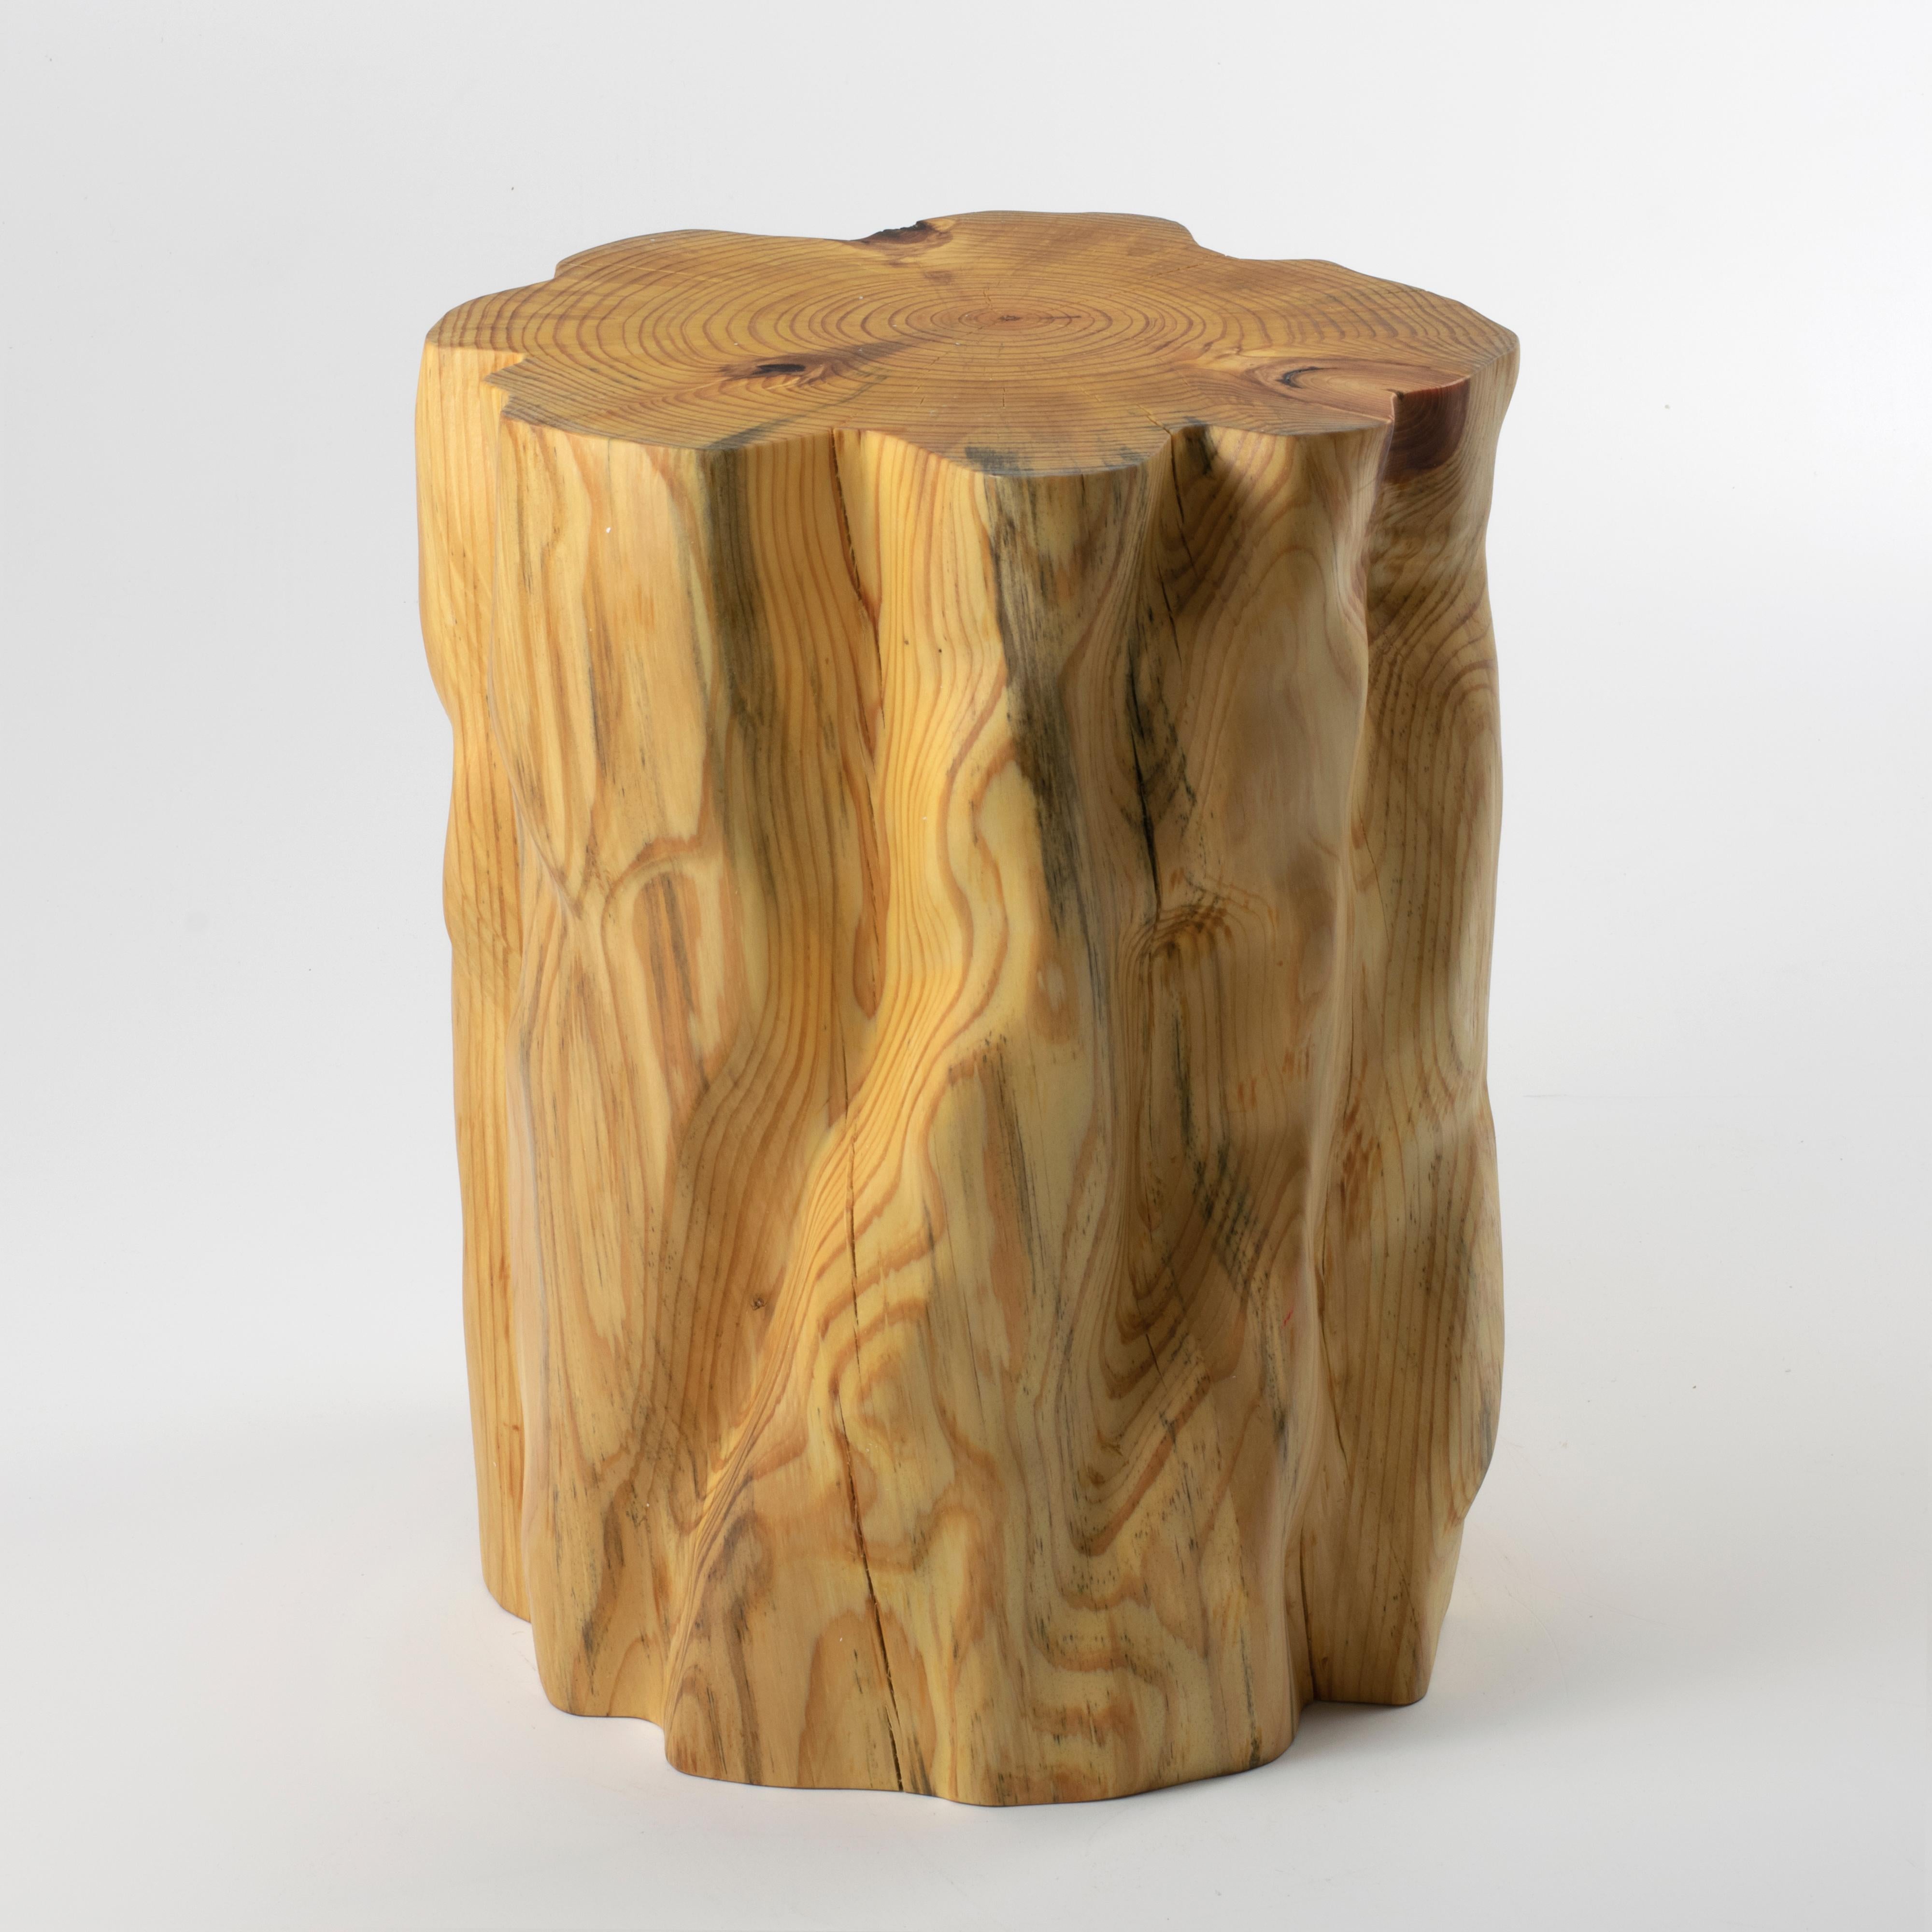 Machine-Made Bark Scale Stool, Set of 3 by Timbur, Represented by Tuleste Factory